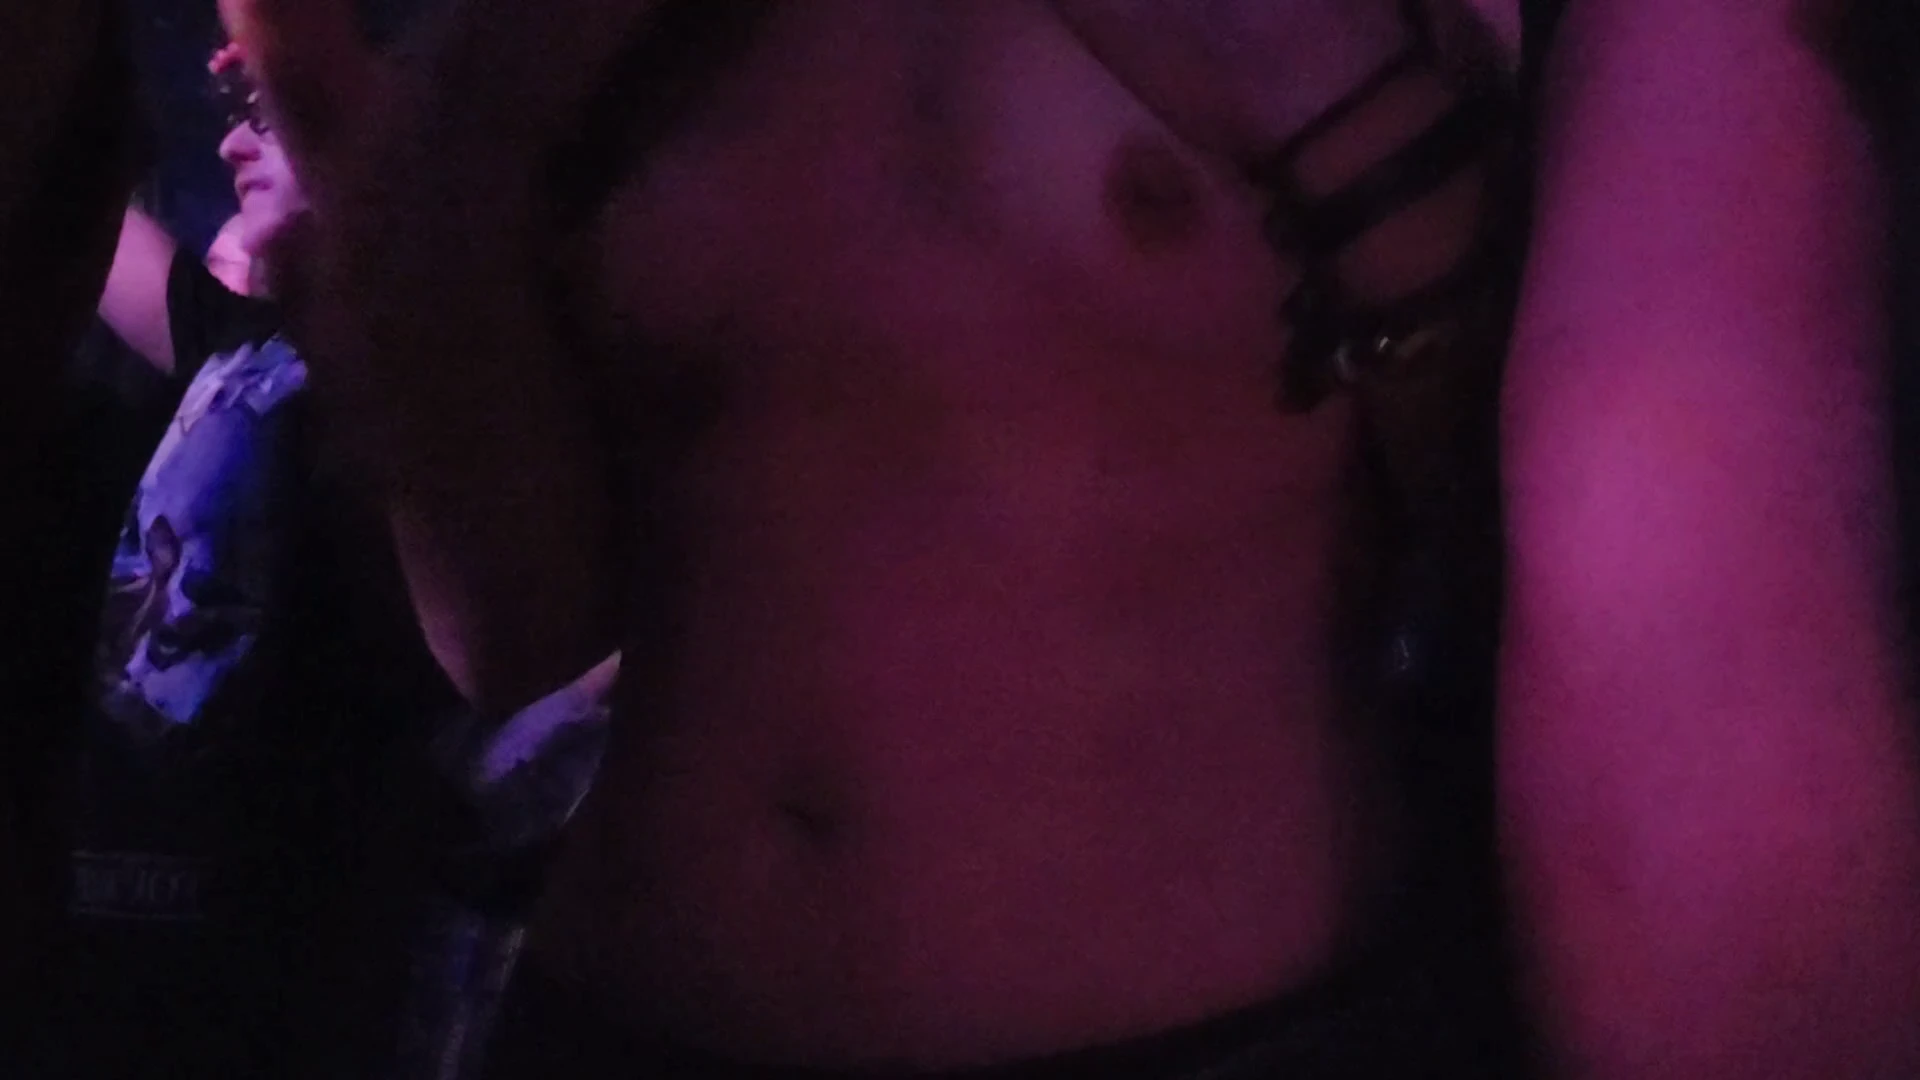 Showing my boobs at a concert